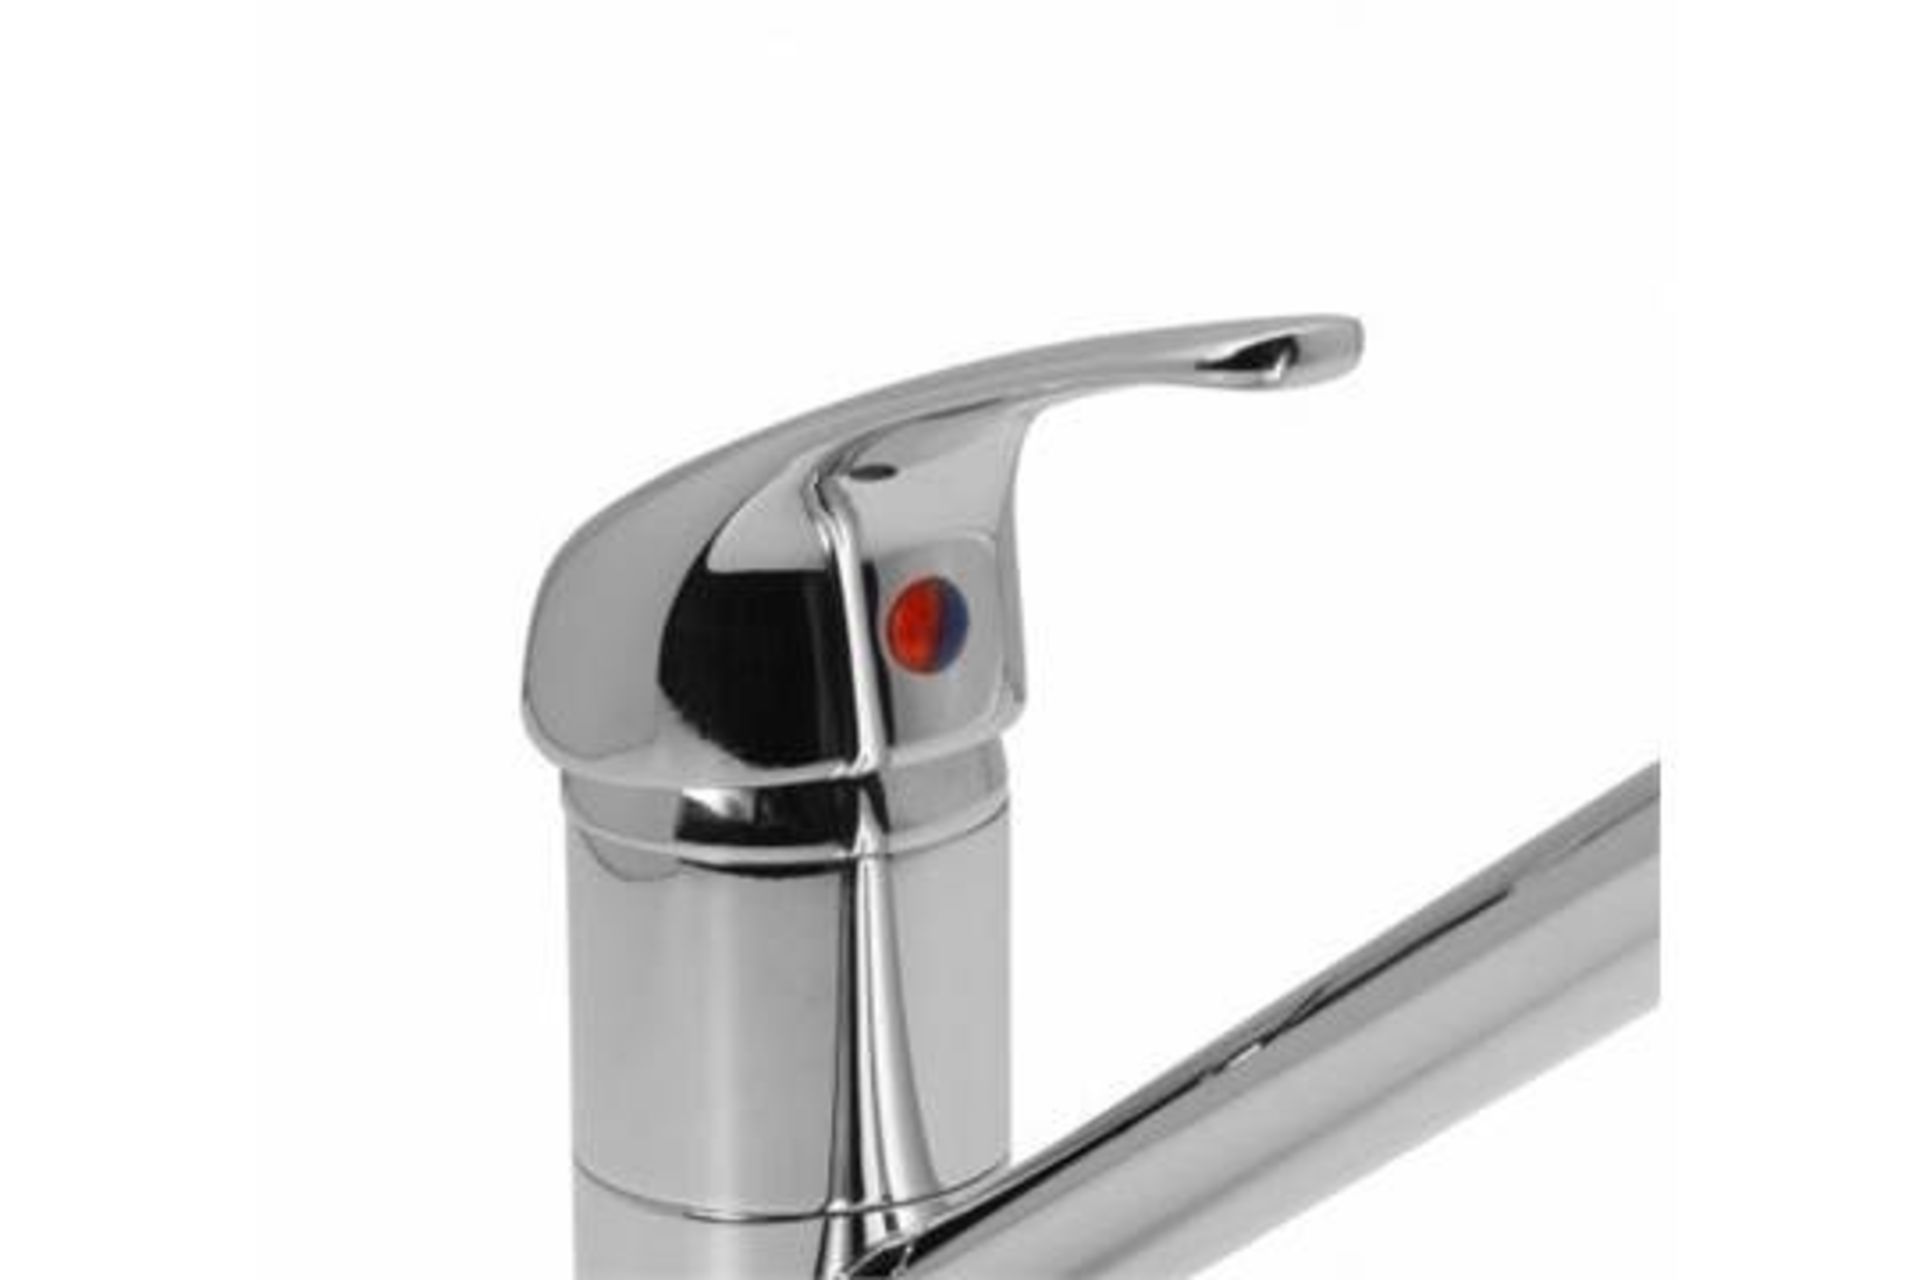 10 x Tessa Chrome Plated Kitchen Mixer Tap - Swivel Spout The lengthy, bold design of the Tessa - Image 2 of 2